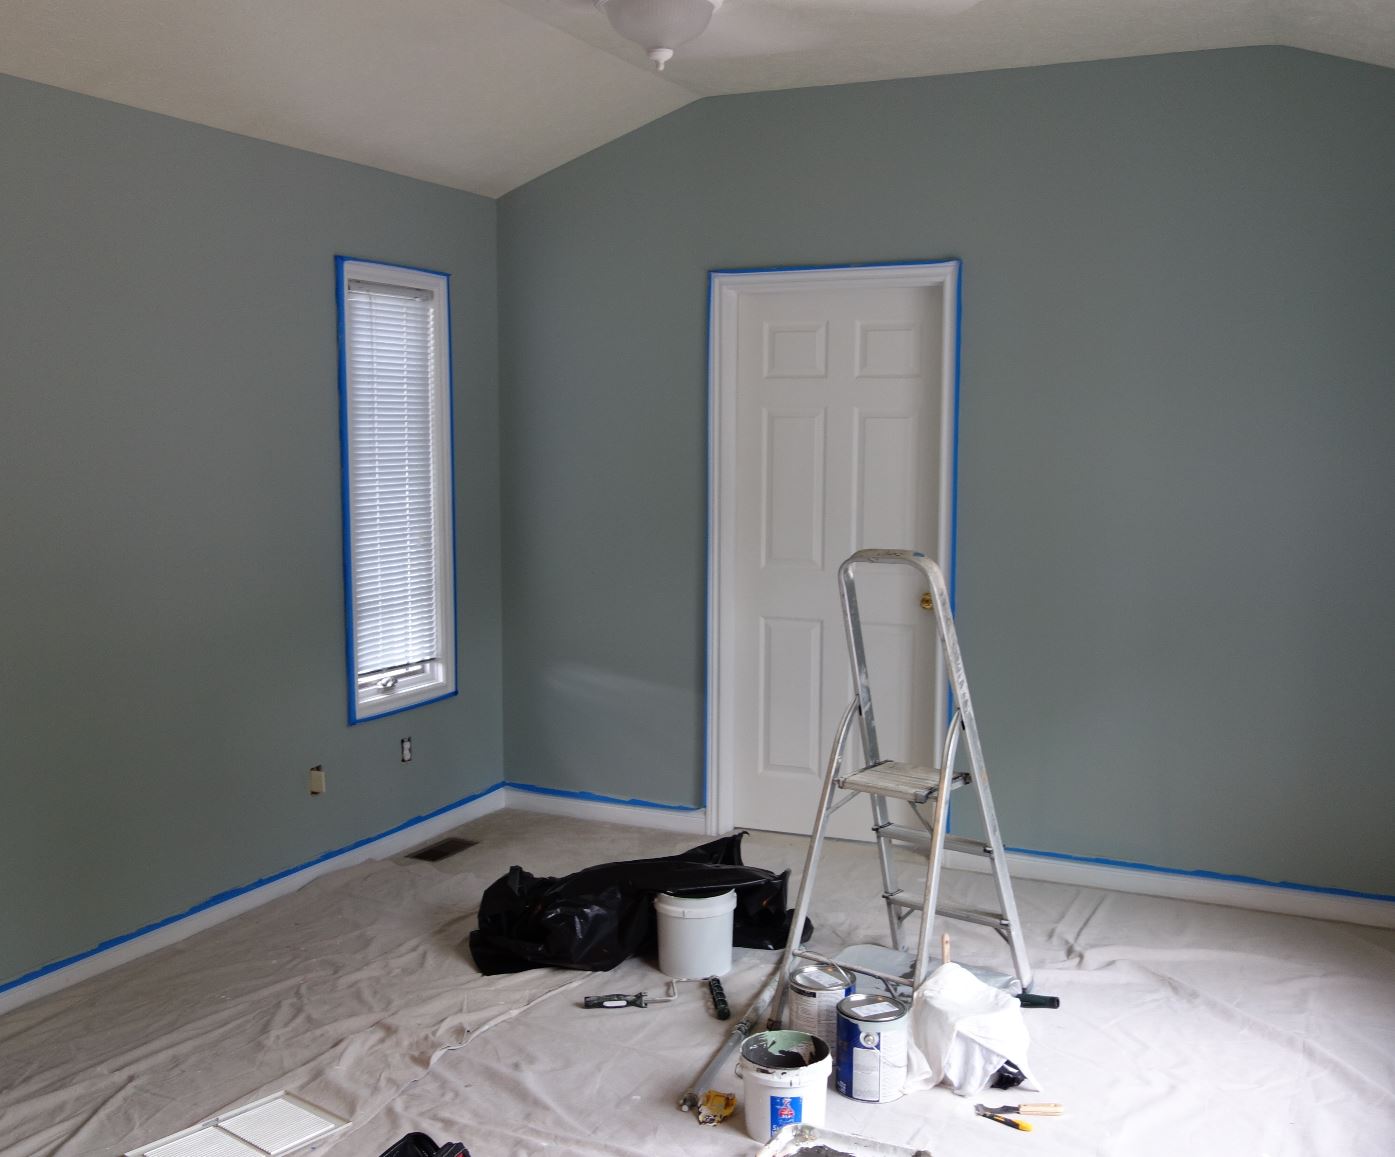 When Is It Safe To Sleep In A Newly Painted Room